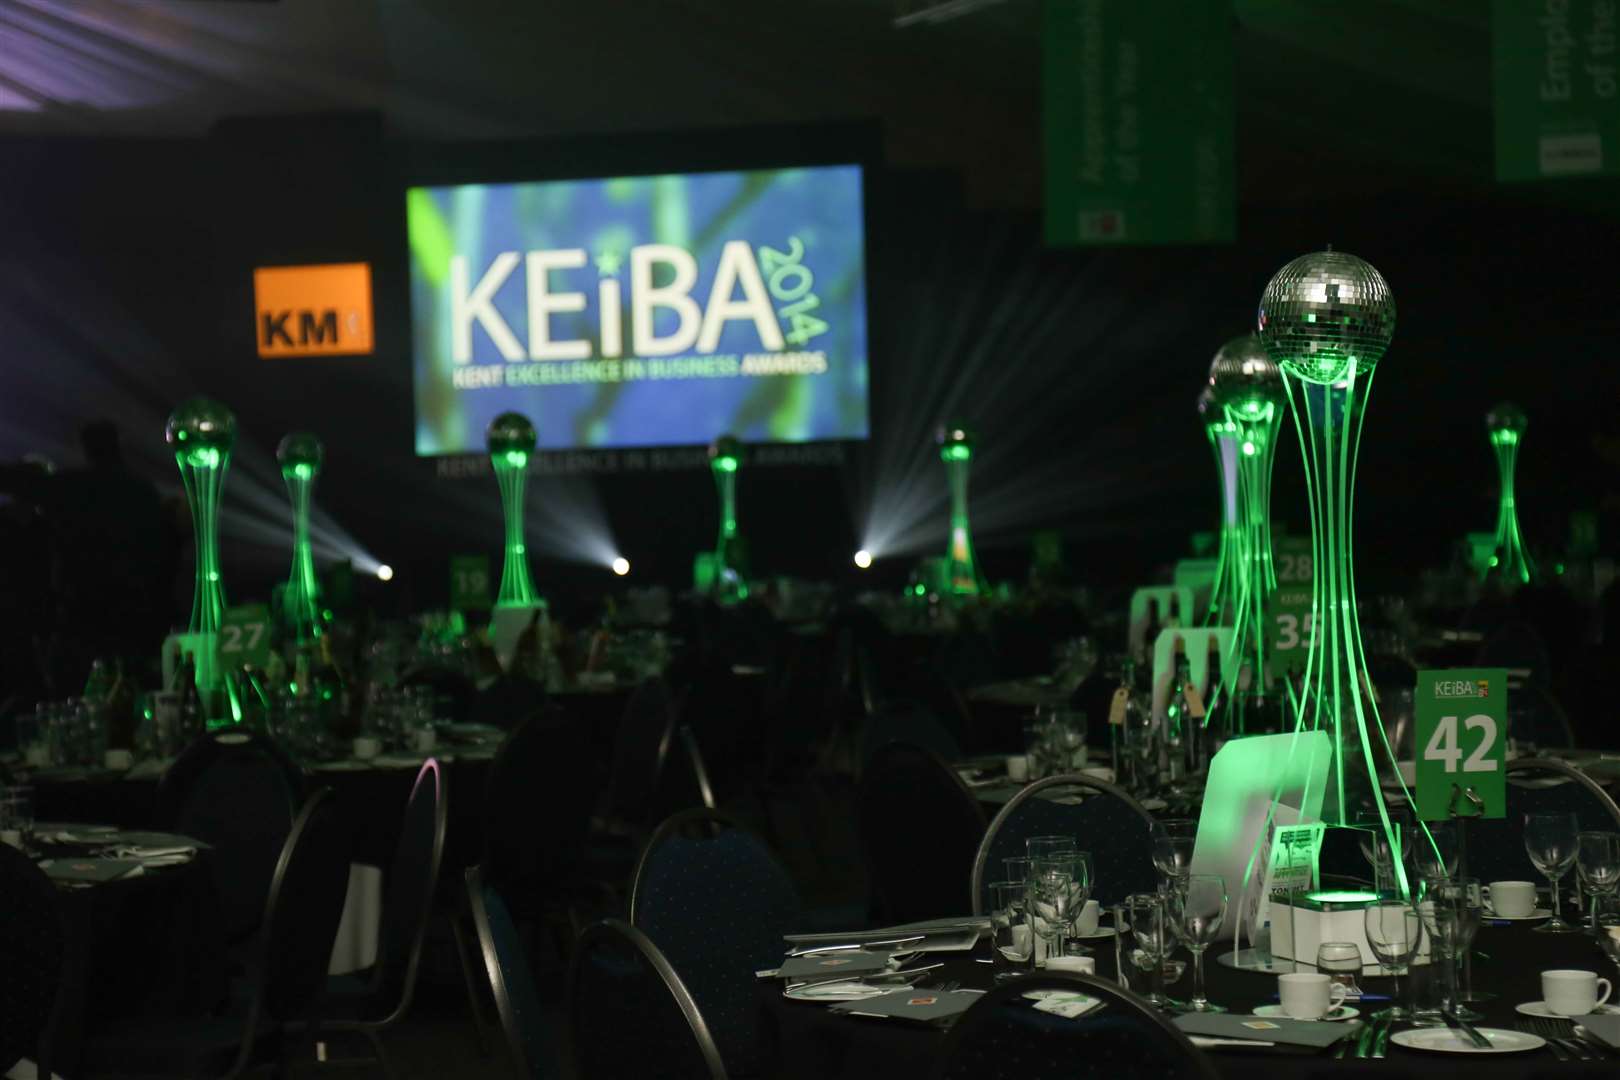 KEiBA finalists attend a gala dinner at the Kent Showground, Detling